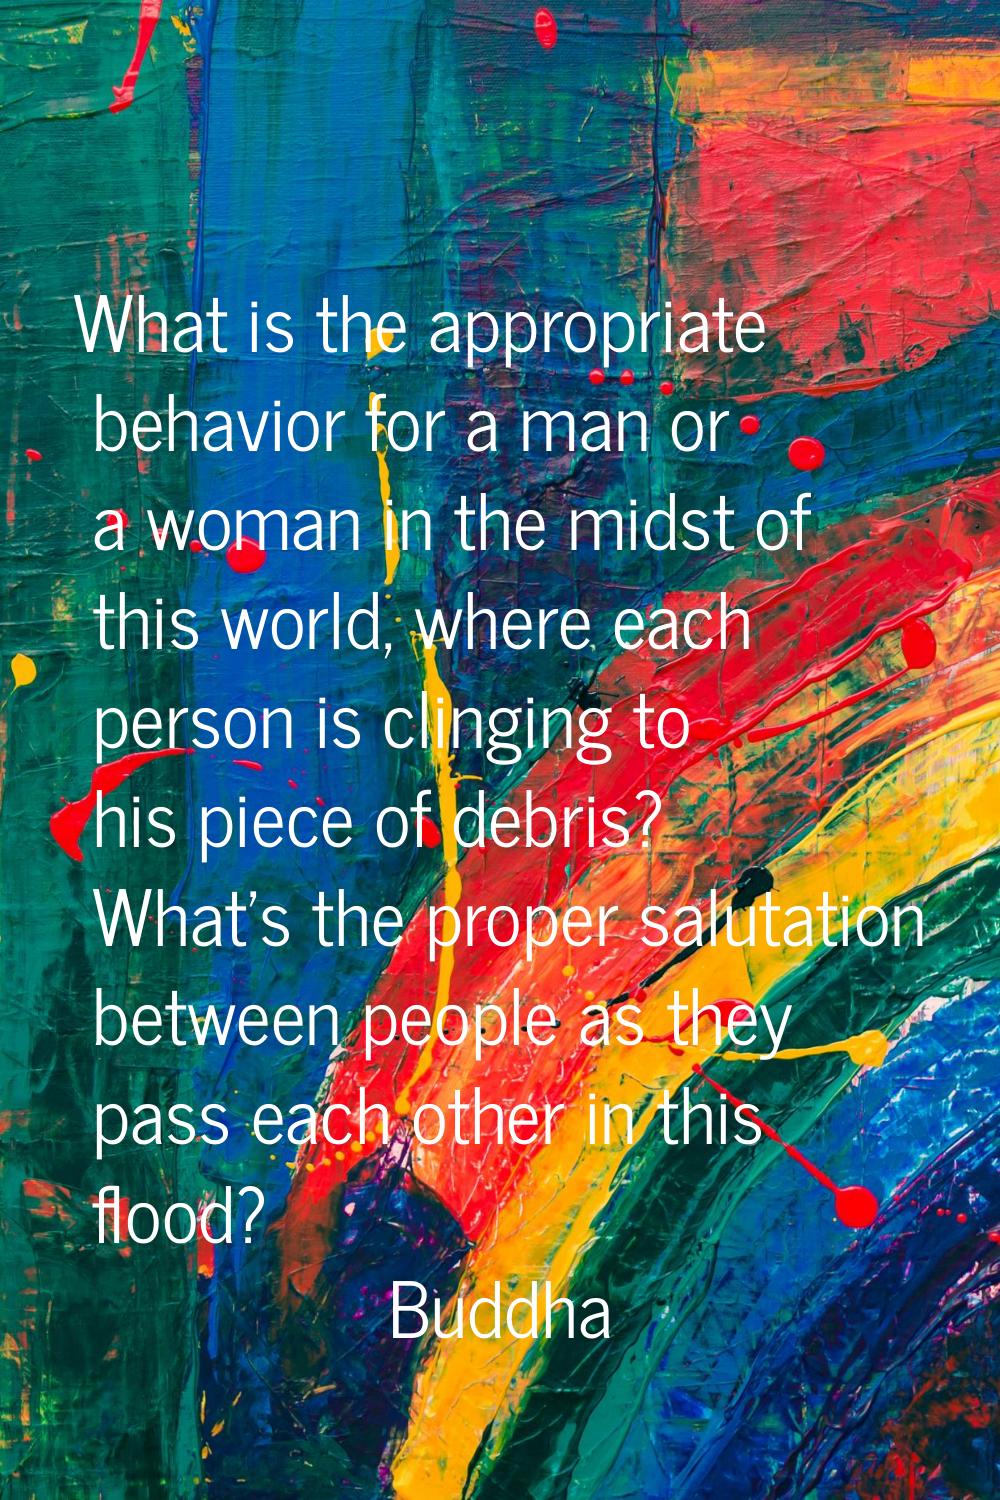 What is the appropriate behavior for a man or a woman in the midst of this world, where each person